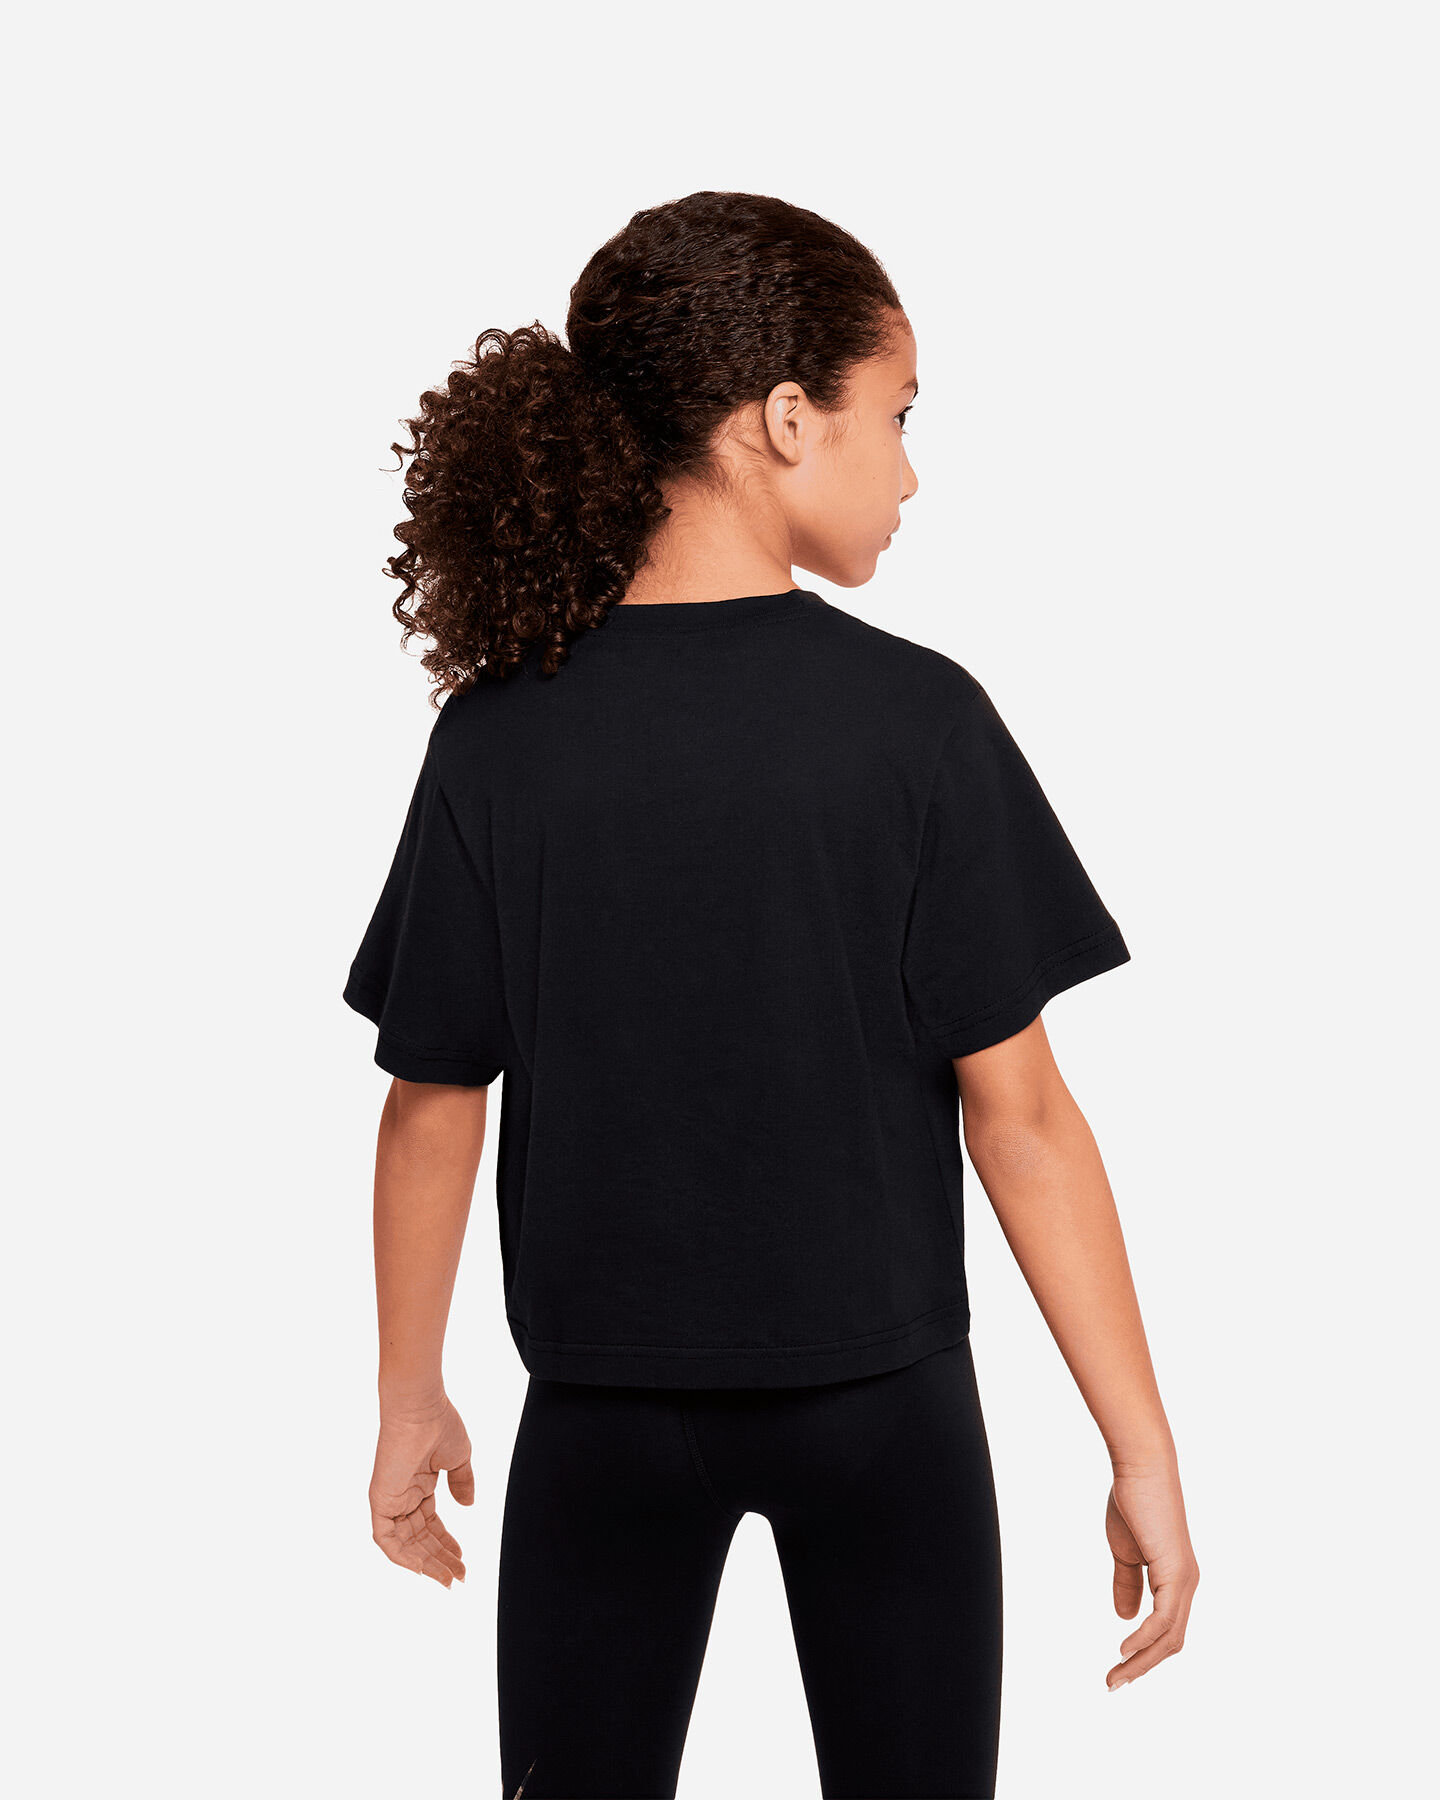  T-Shirt NIKE IRIDESCENT JR S5495263 scatto 1